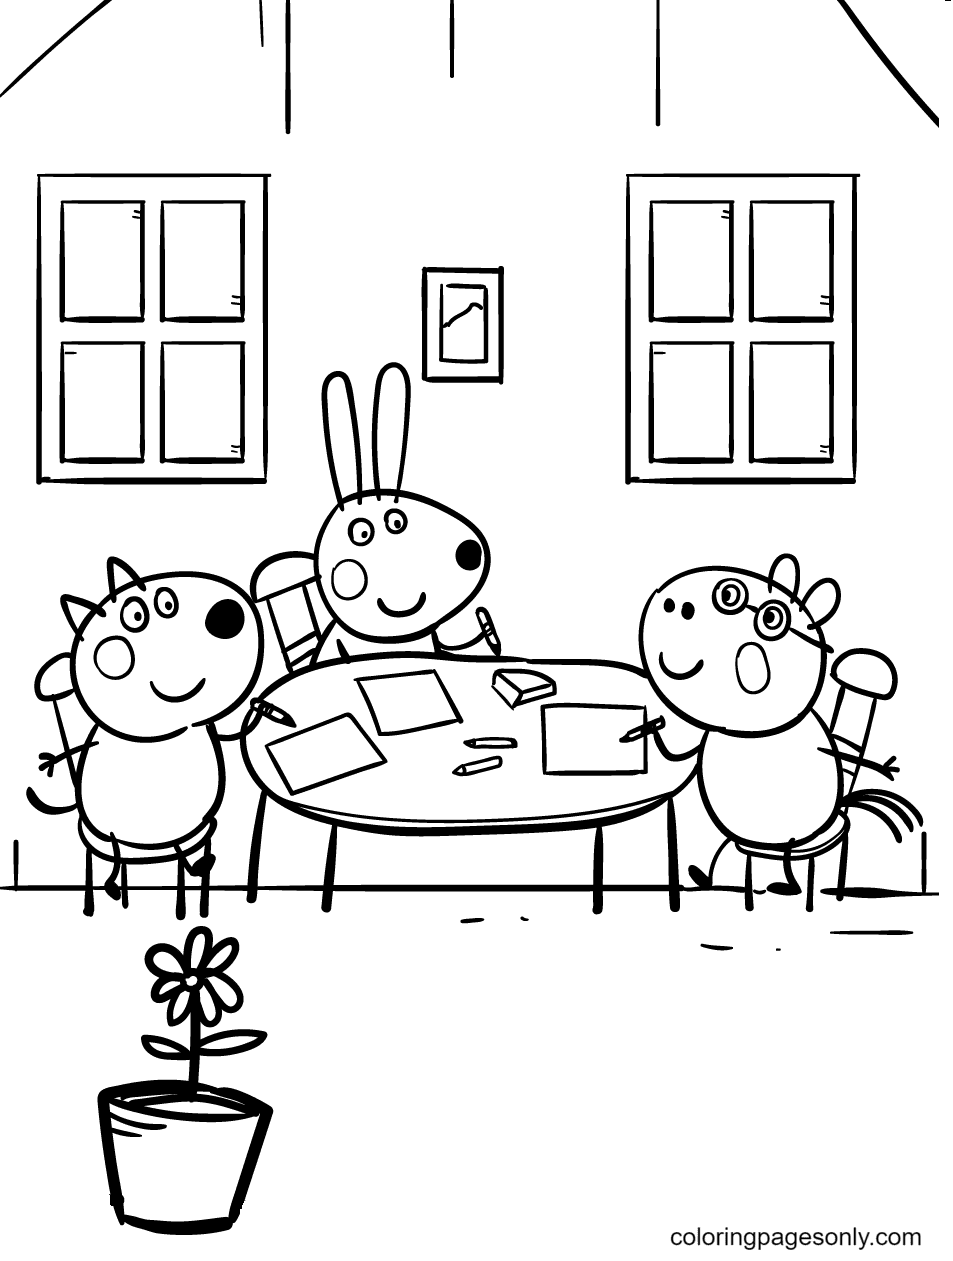 Pedro Pony, Rebecca Rabbit and Danny Dog Coloring Page